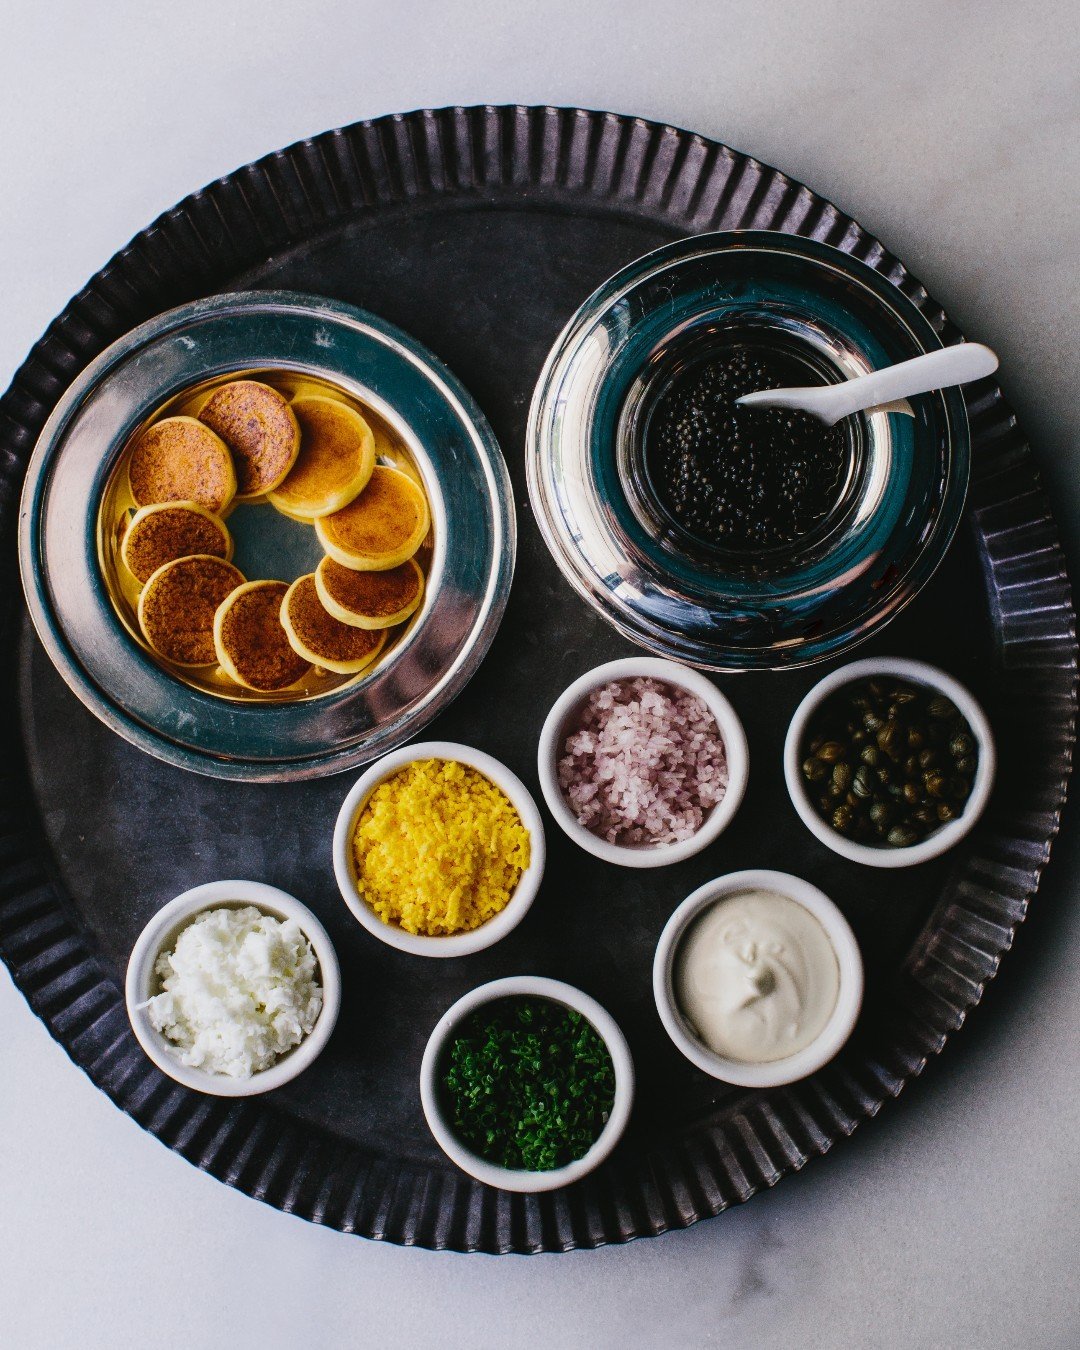 Bacchanalia&rsquo;s caviar service was included in The Atlantan's piece on the most extravagant dining experiences in Atlanta! Book a table on @resy to see for yourself.

Read the full article at the link in our bio!